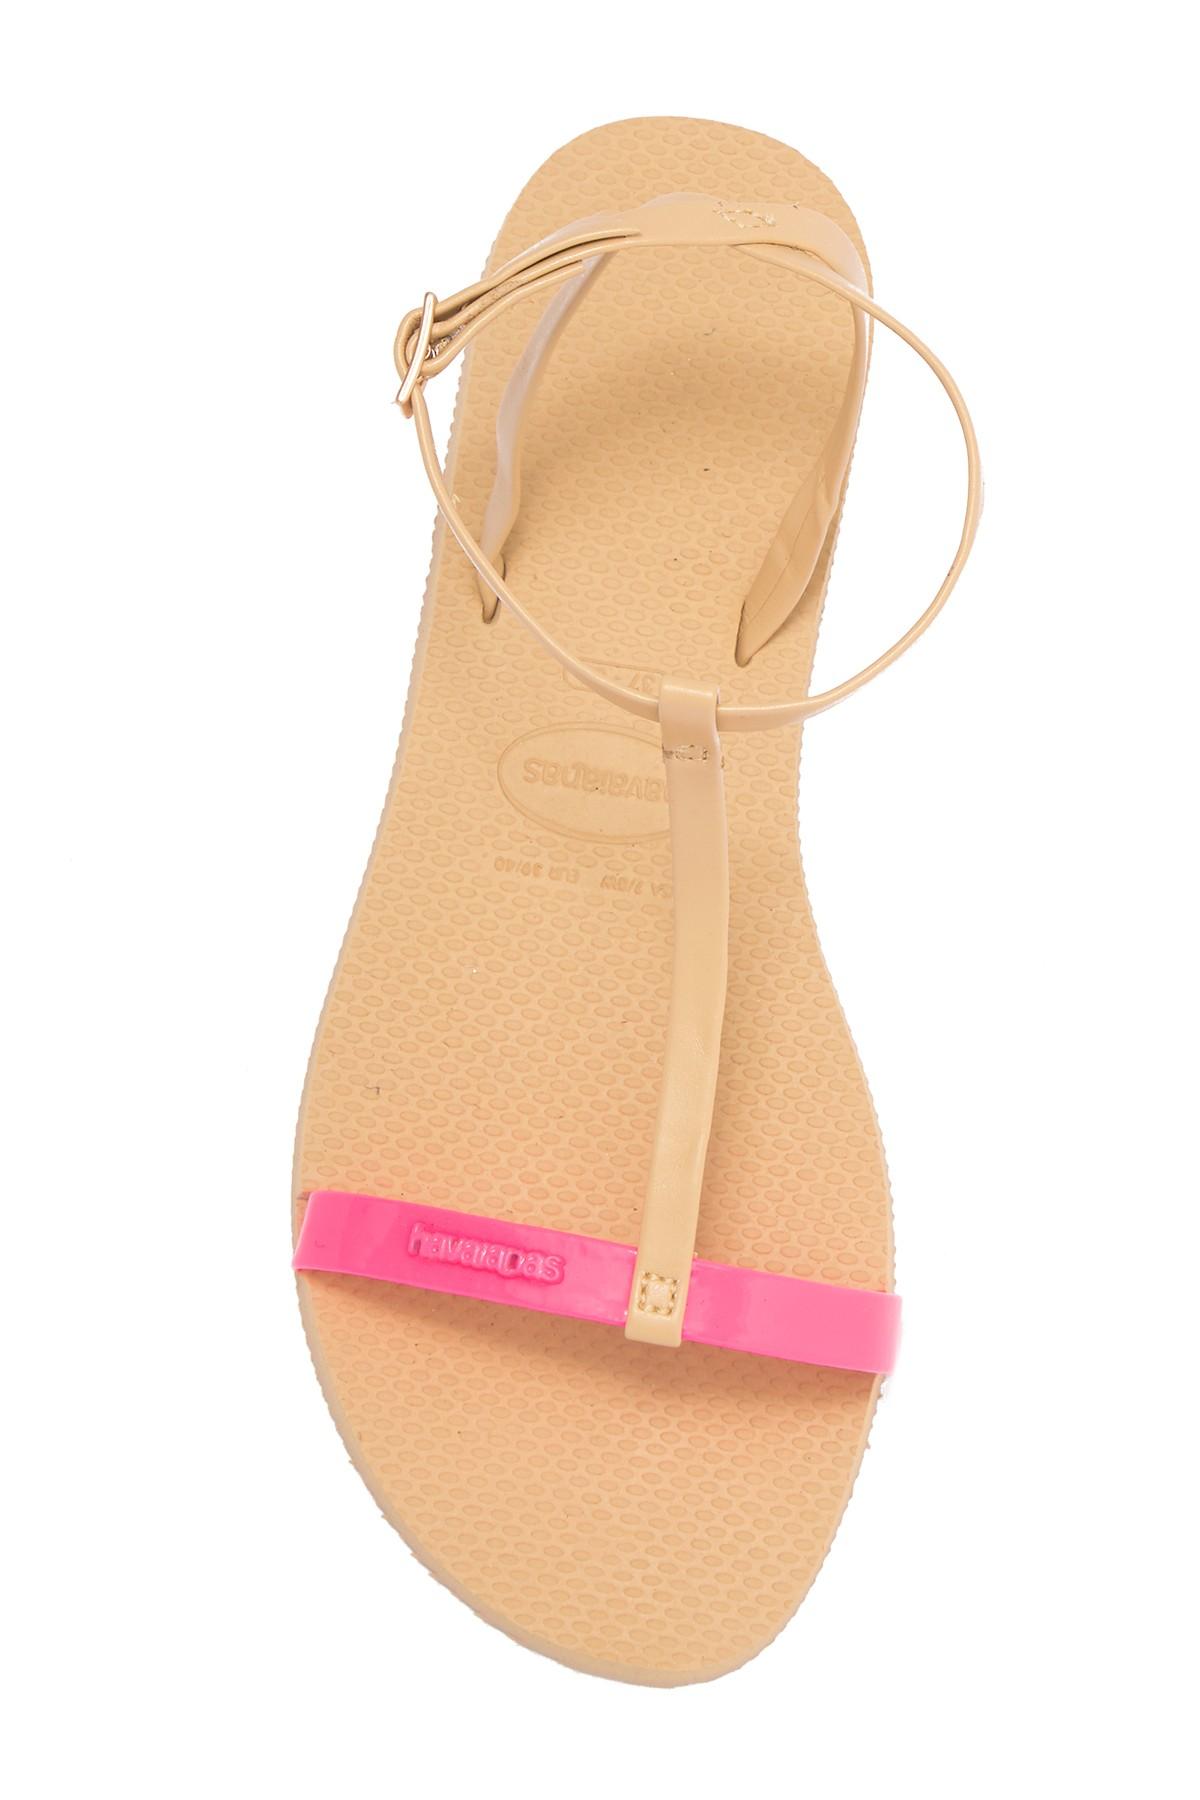  Havaianas  Leather You Belize Sandal  in Pink  Lyst